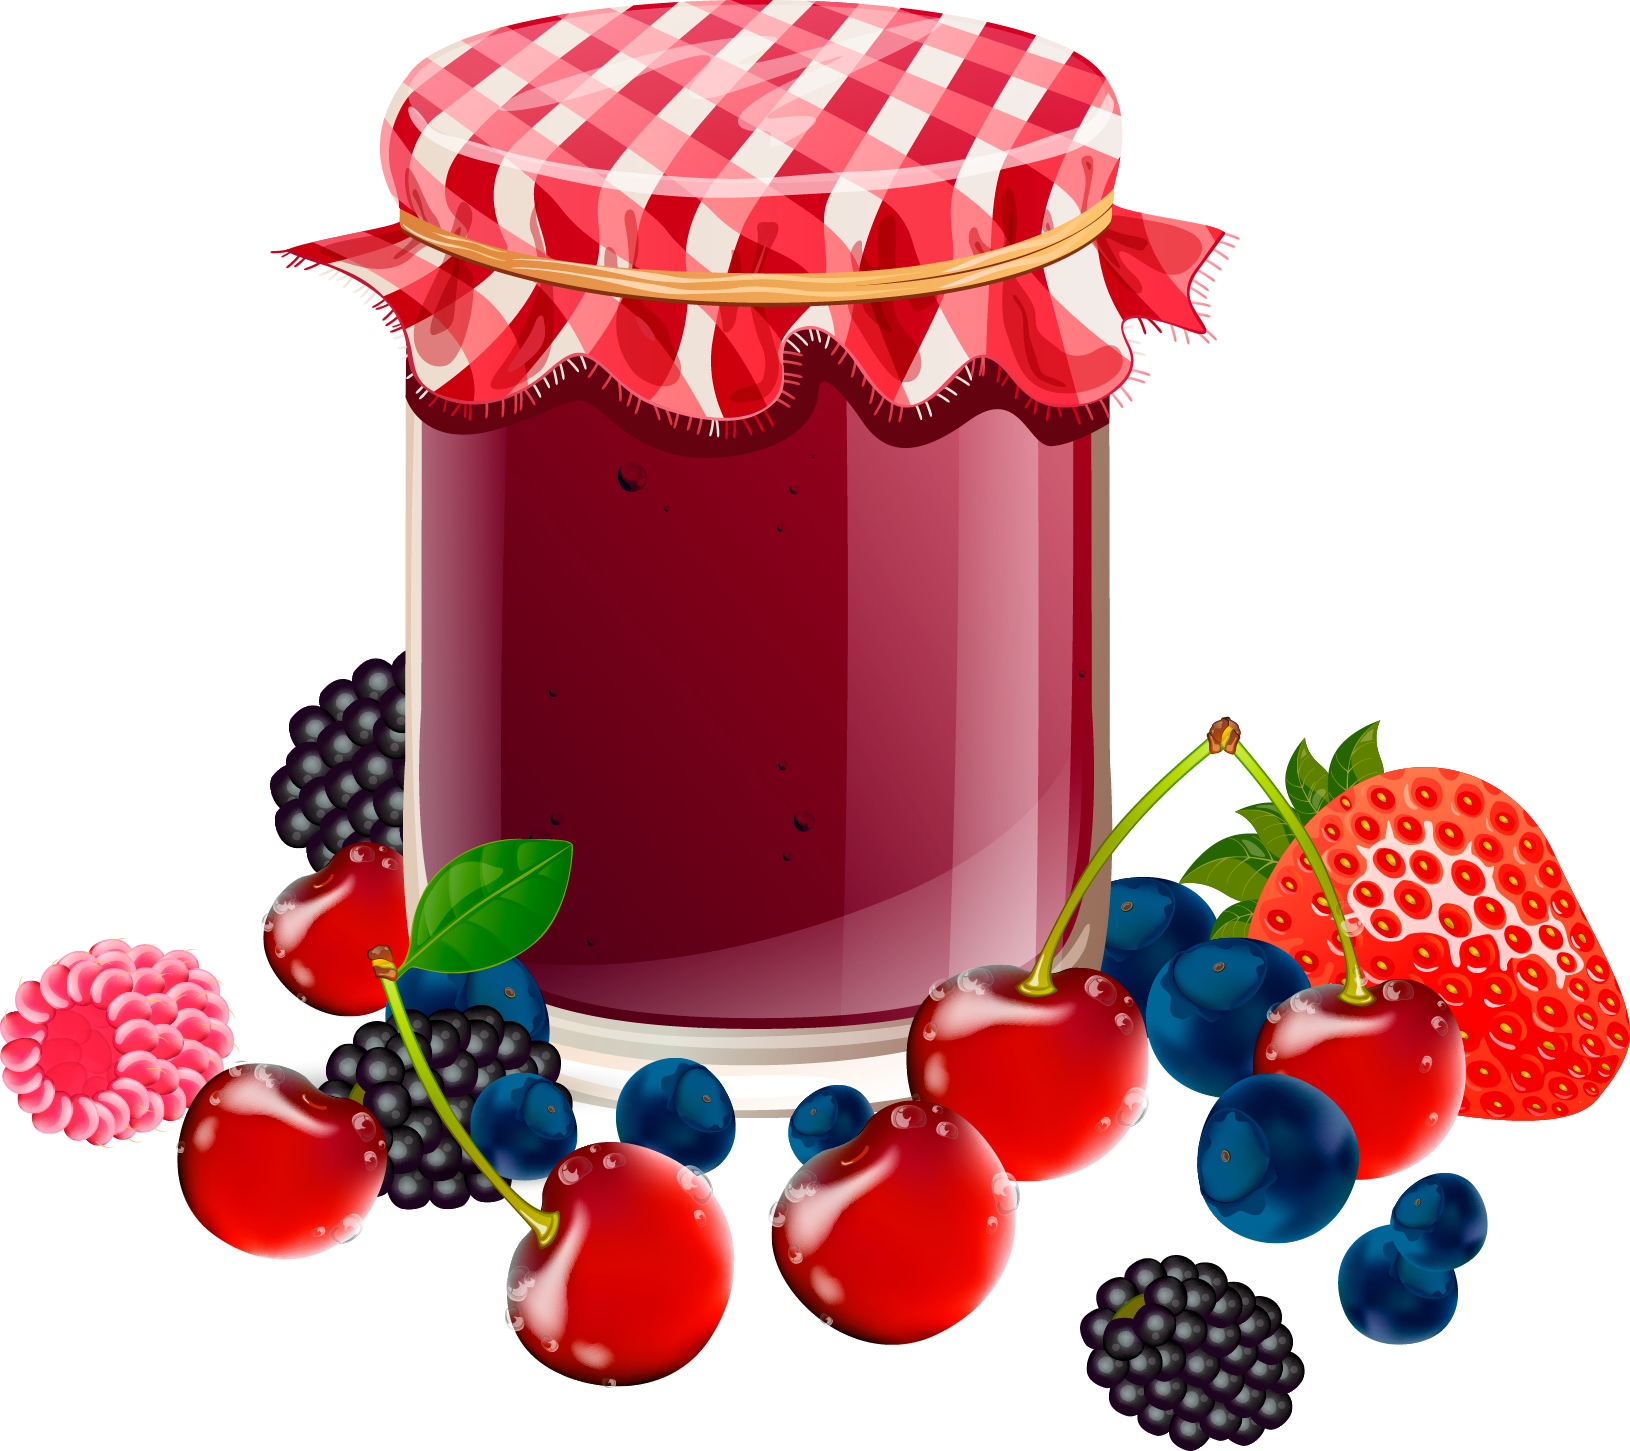 A Jar Of Jam And Berries